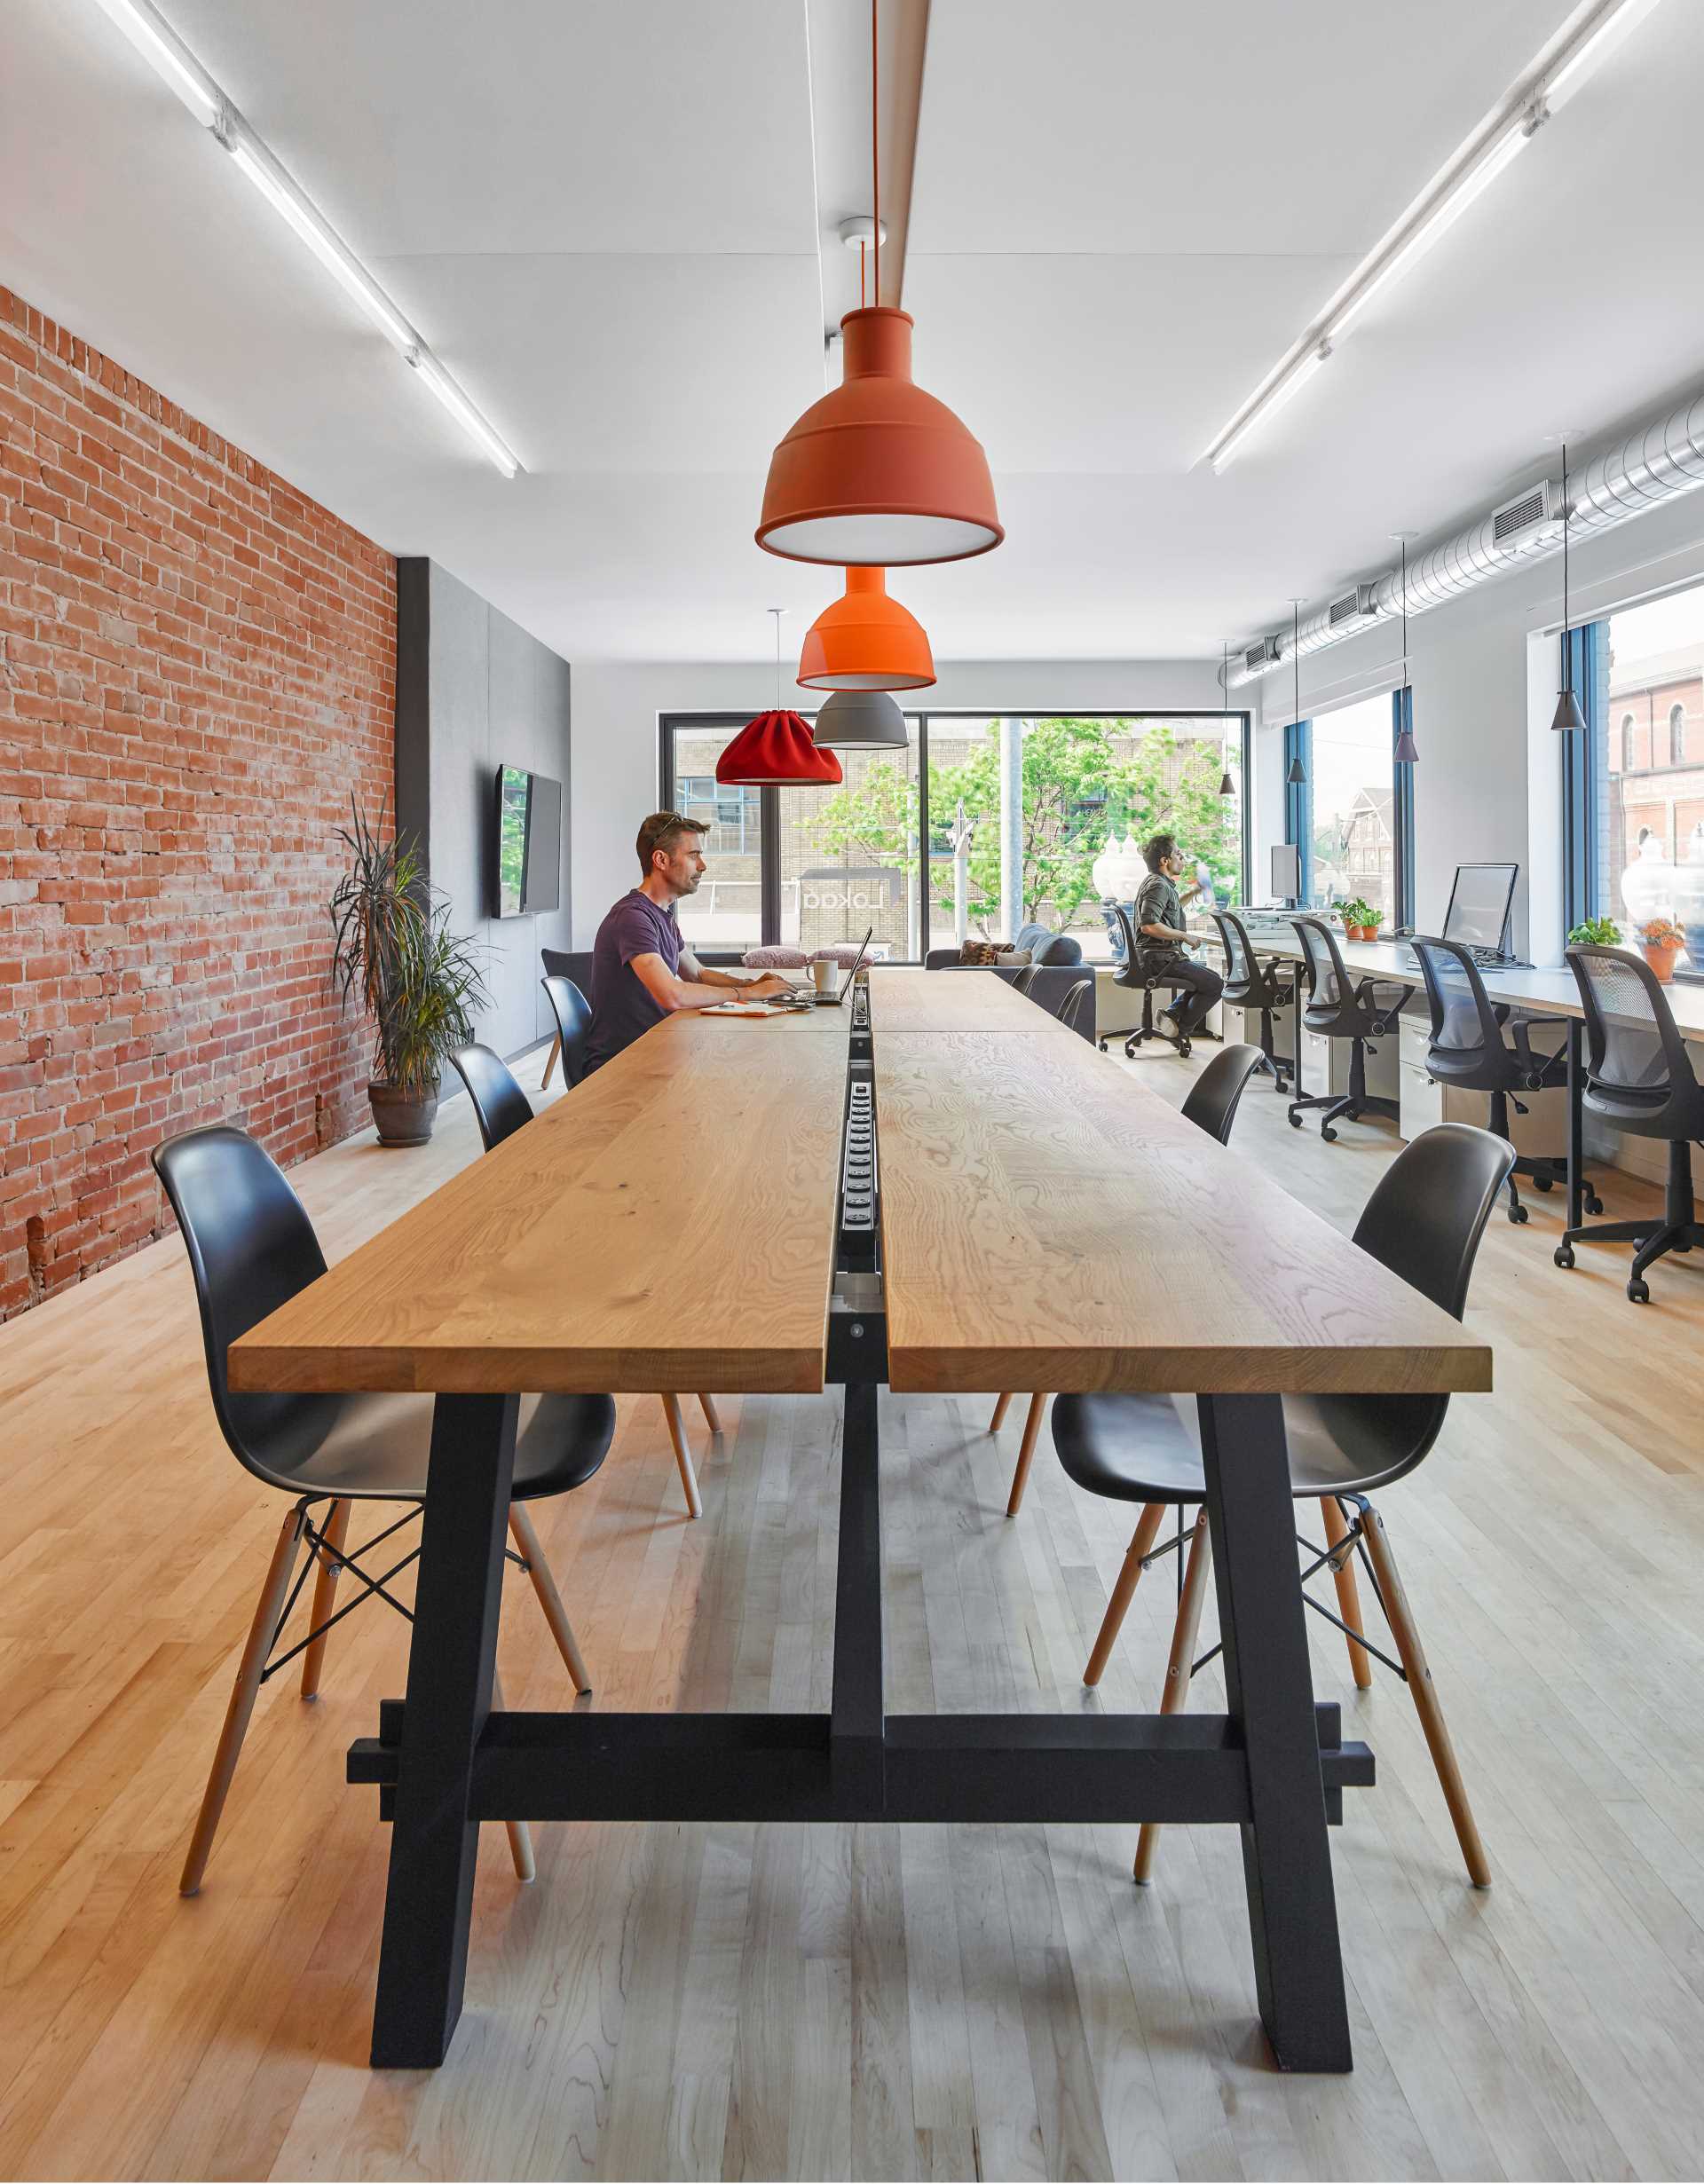 While the crisp white walls and charcoal grey door frames and partitions introduce a bolder graphic quality to the building’s interior, brightly colored light fixtures introduce a degree of playfulness to the Lokaal workspace.